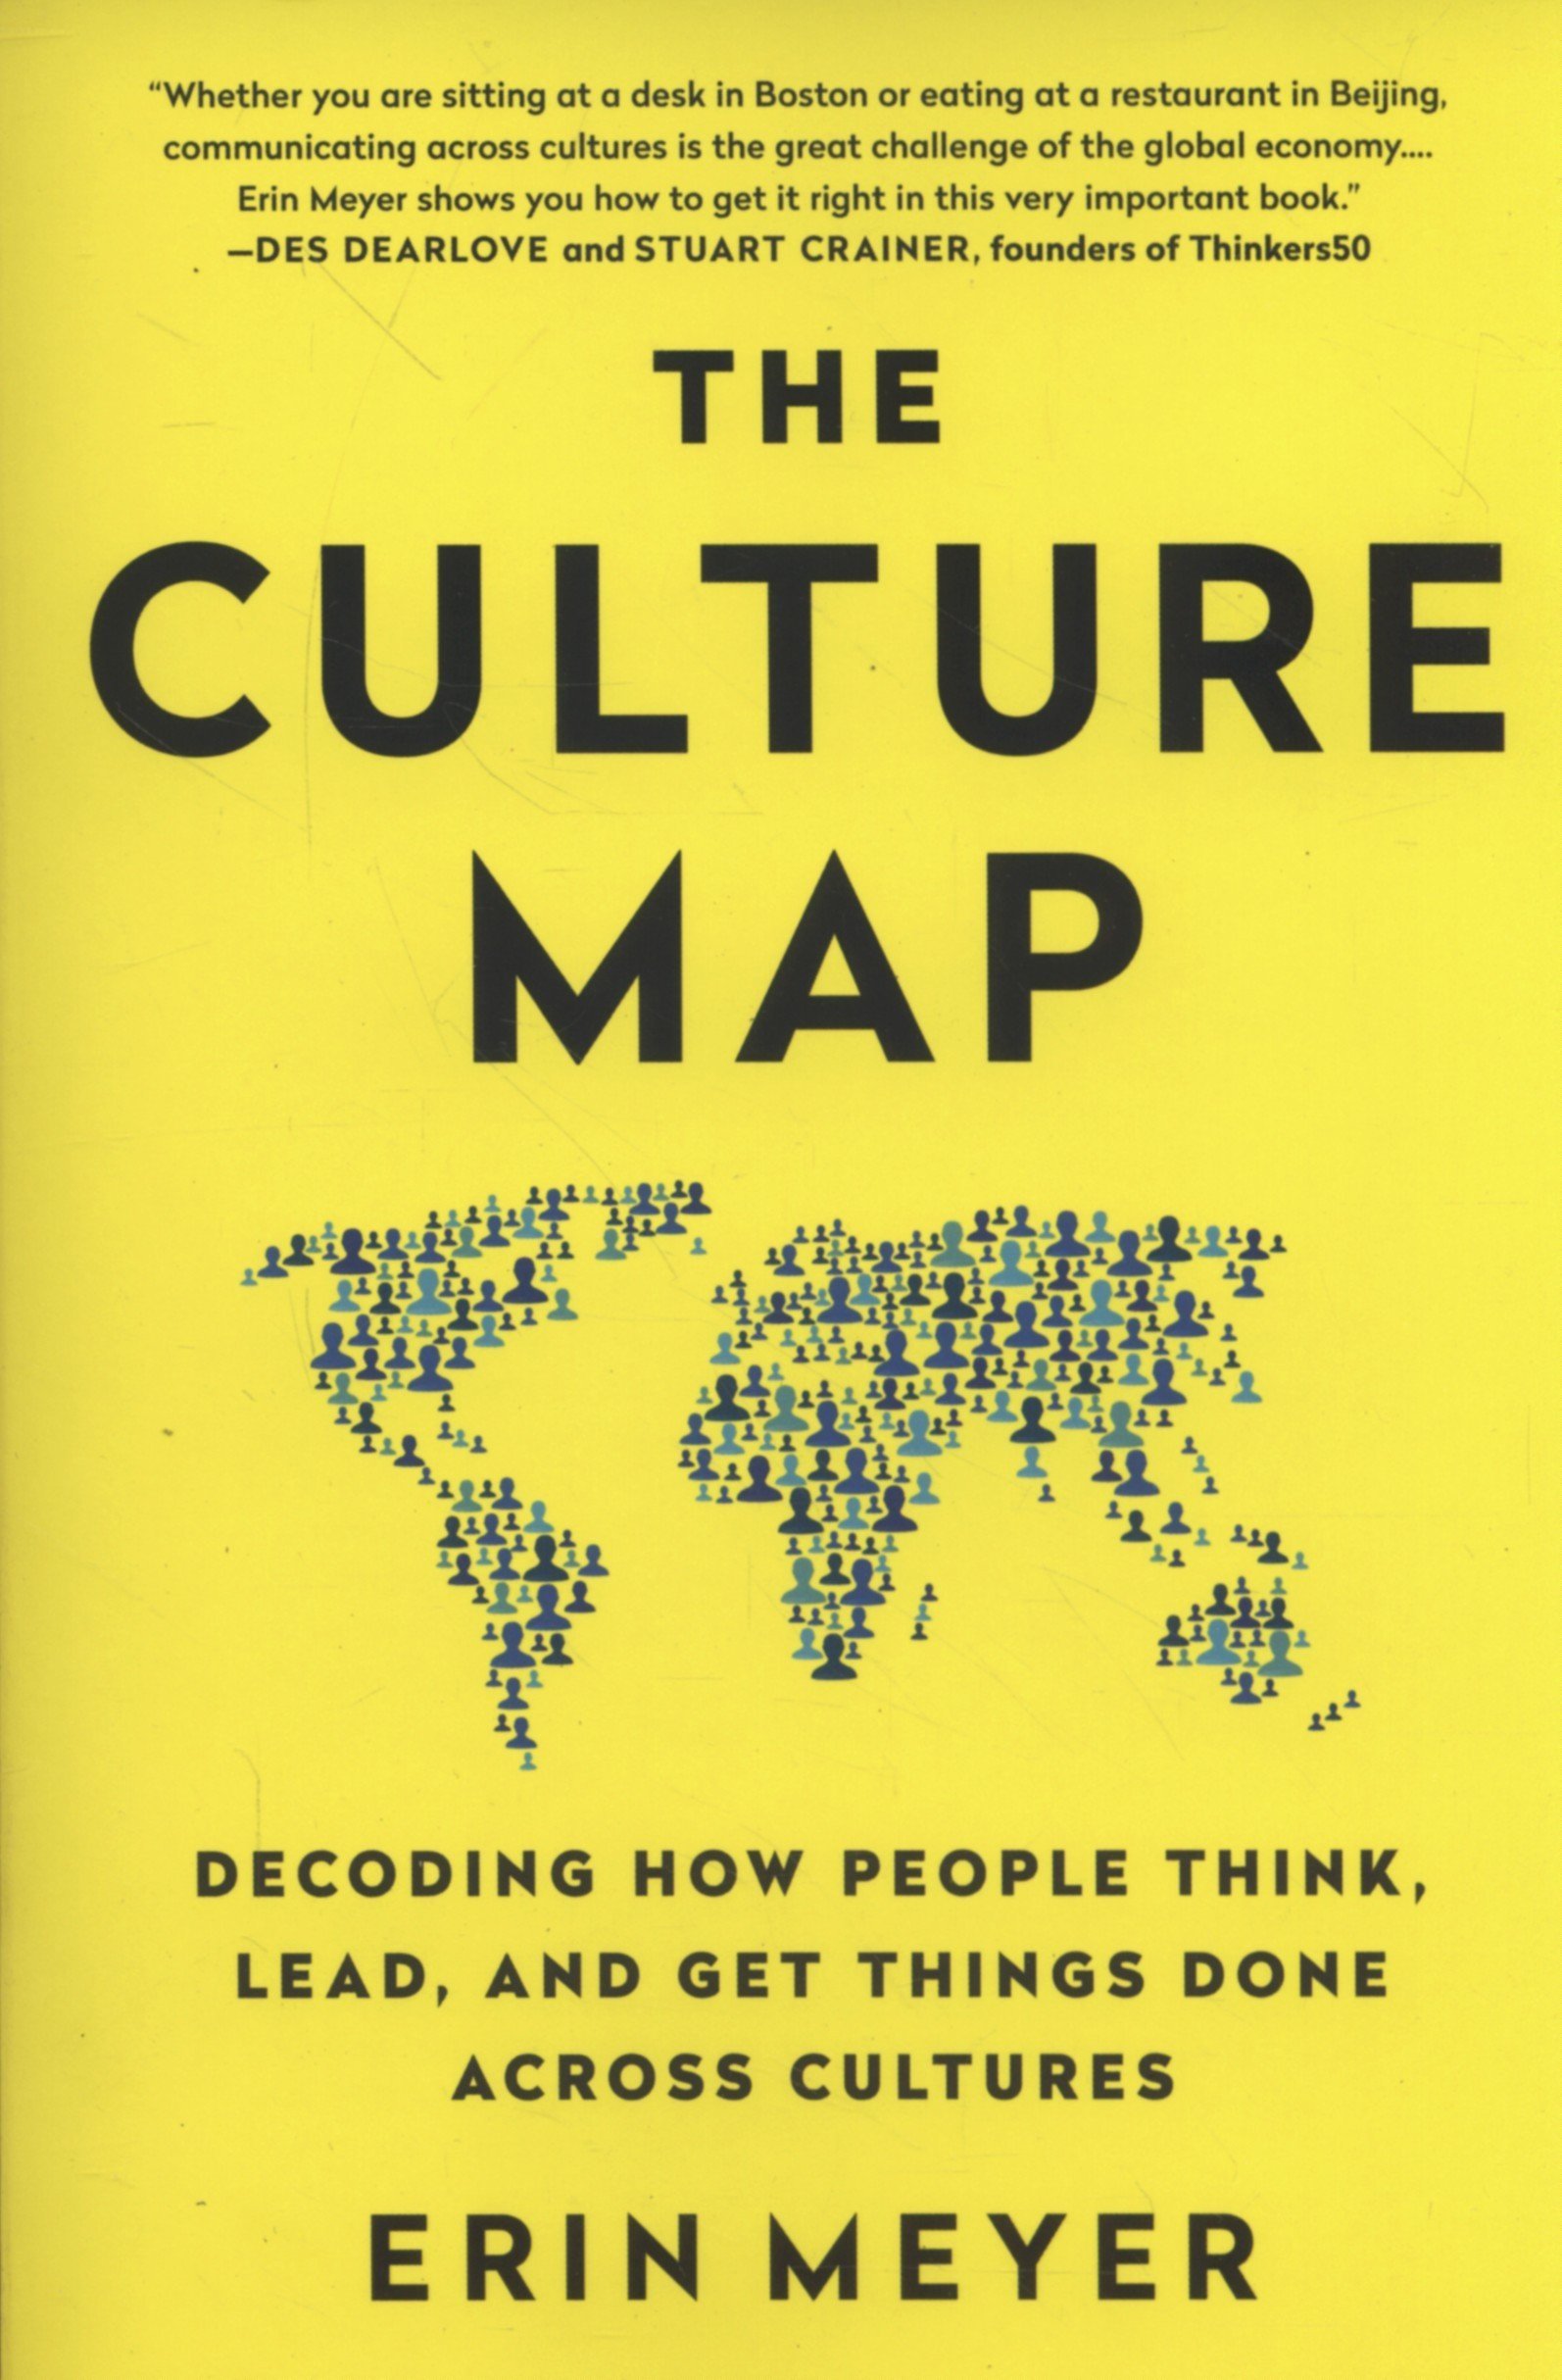 Erin Meyer: The Culture Map (2016, PublicAffairs, Perseus Books Group)